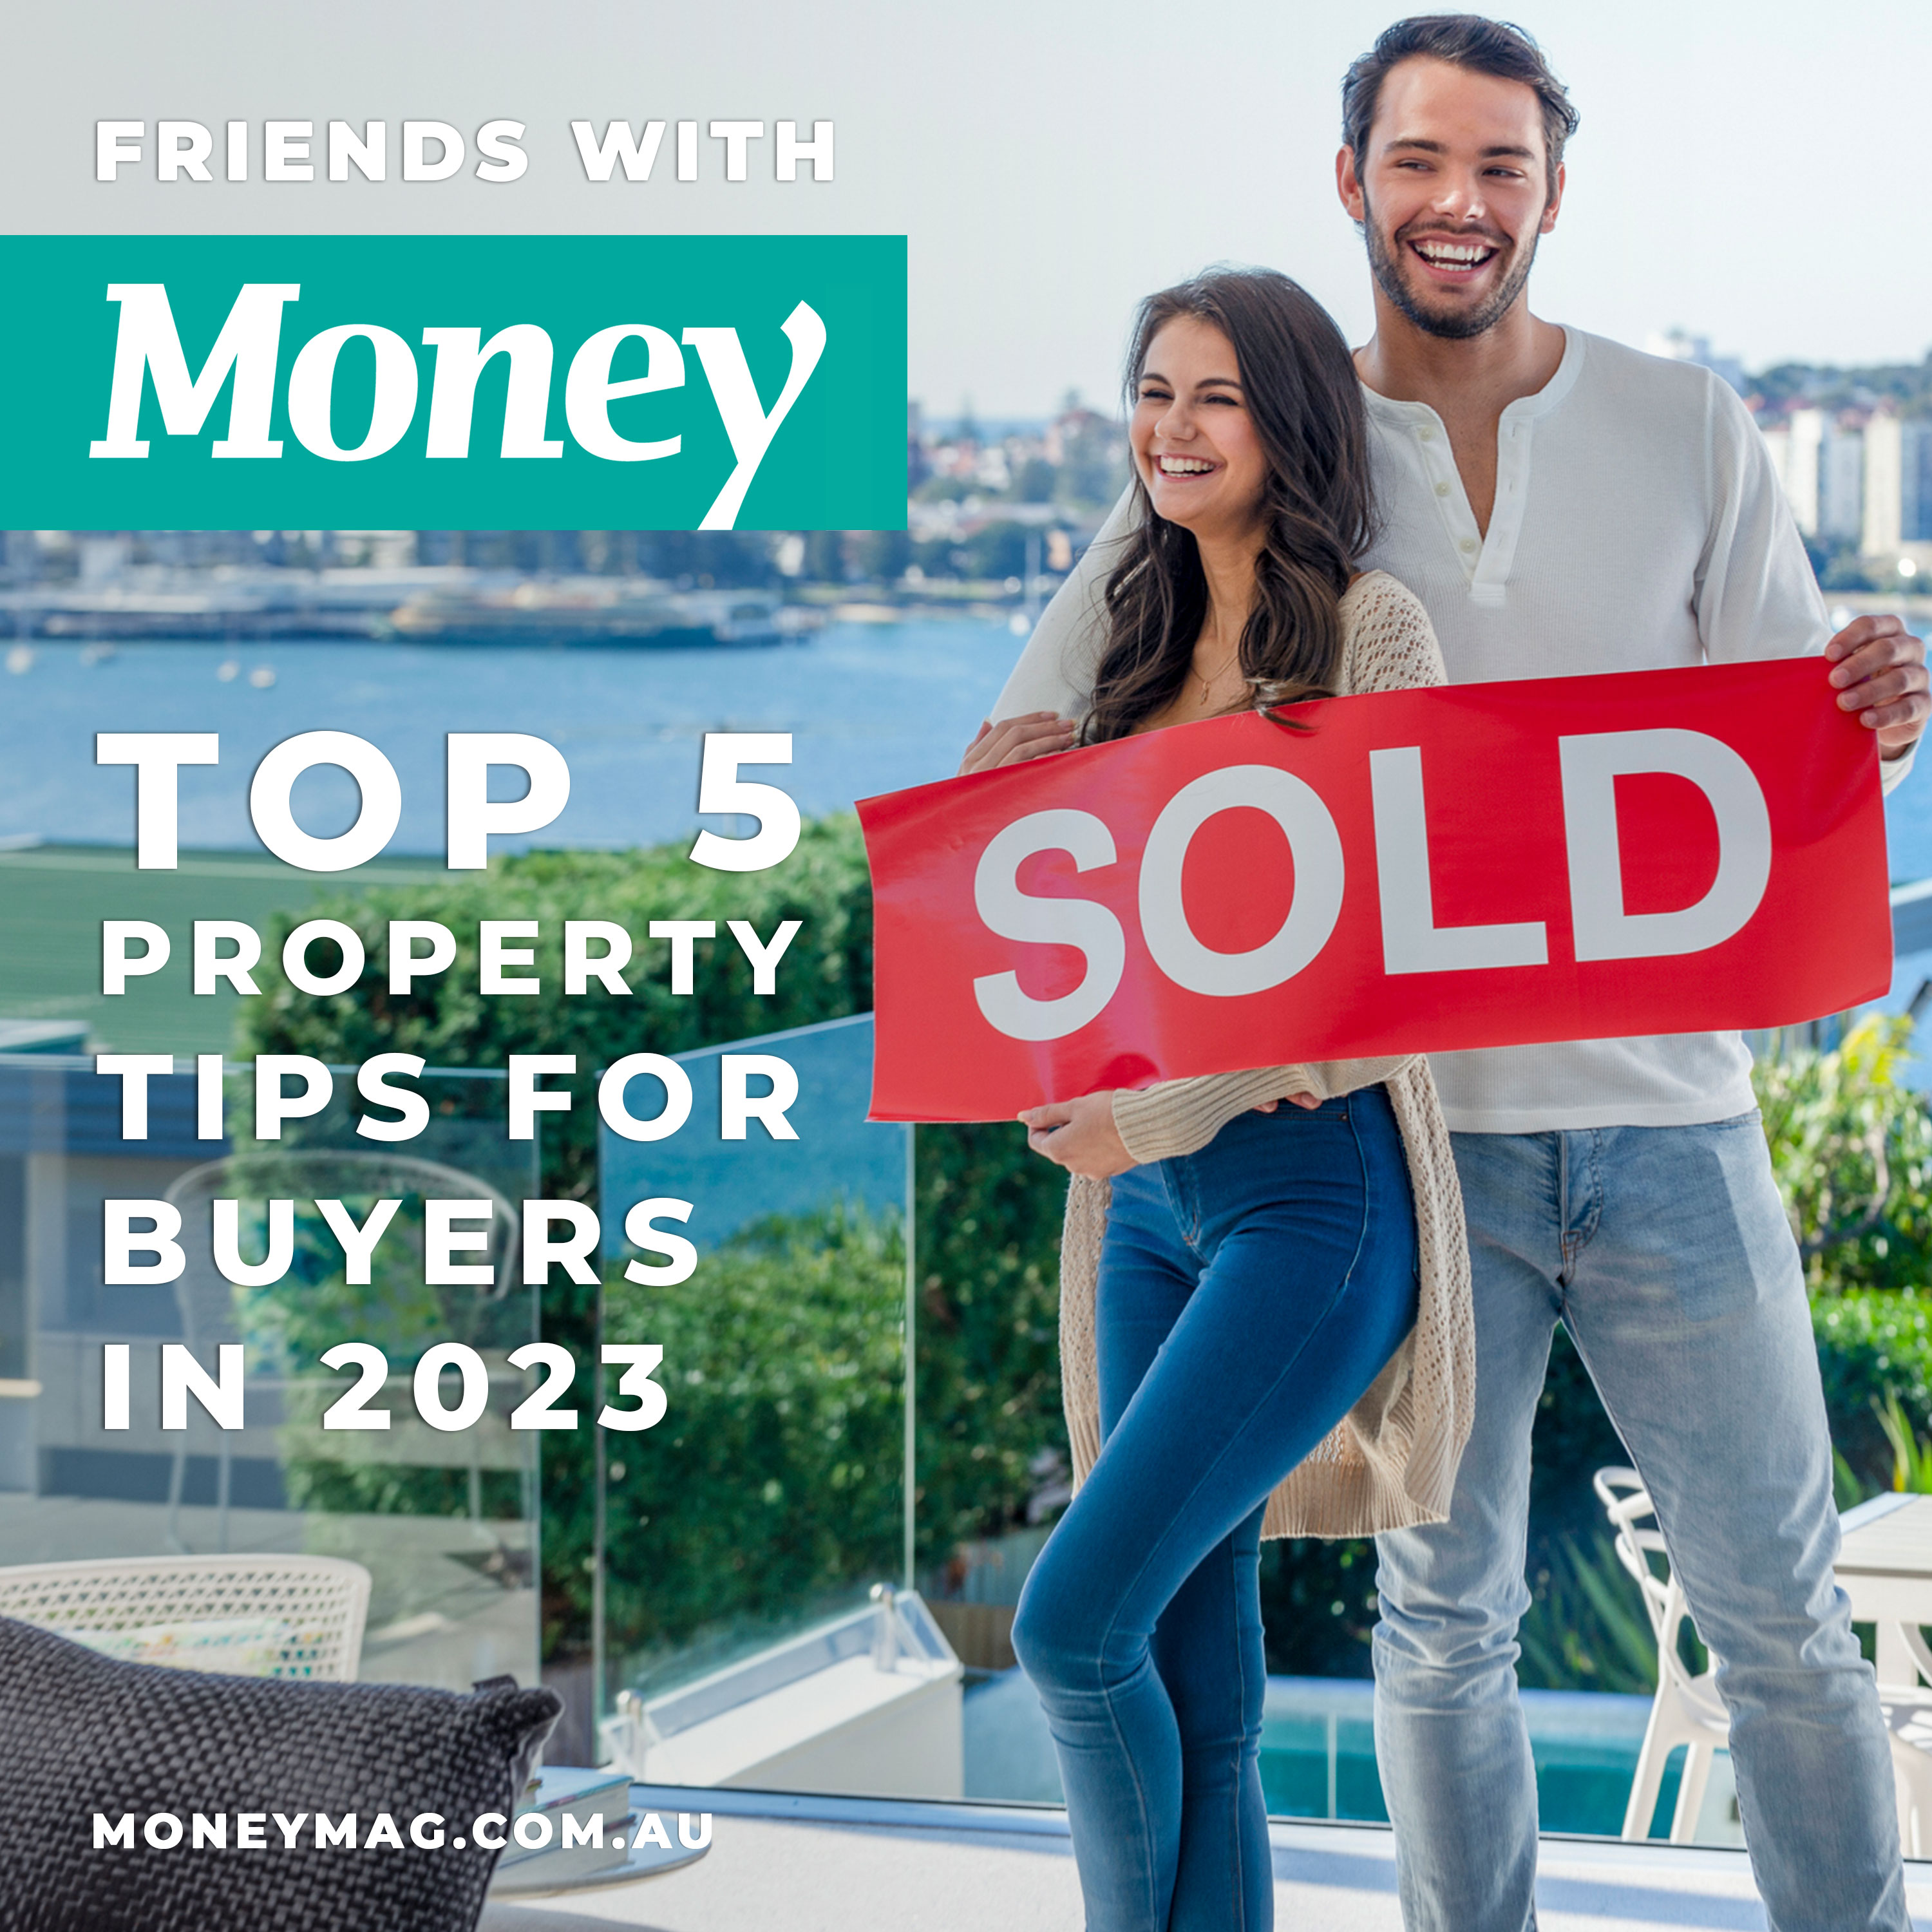 Top 5 property tips for buyers in 2023